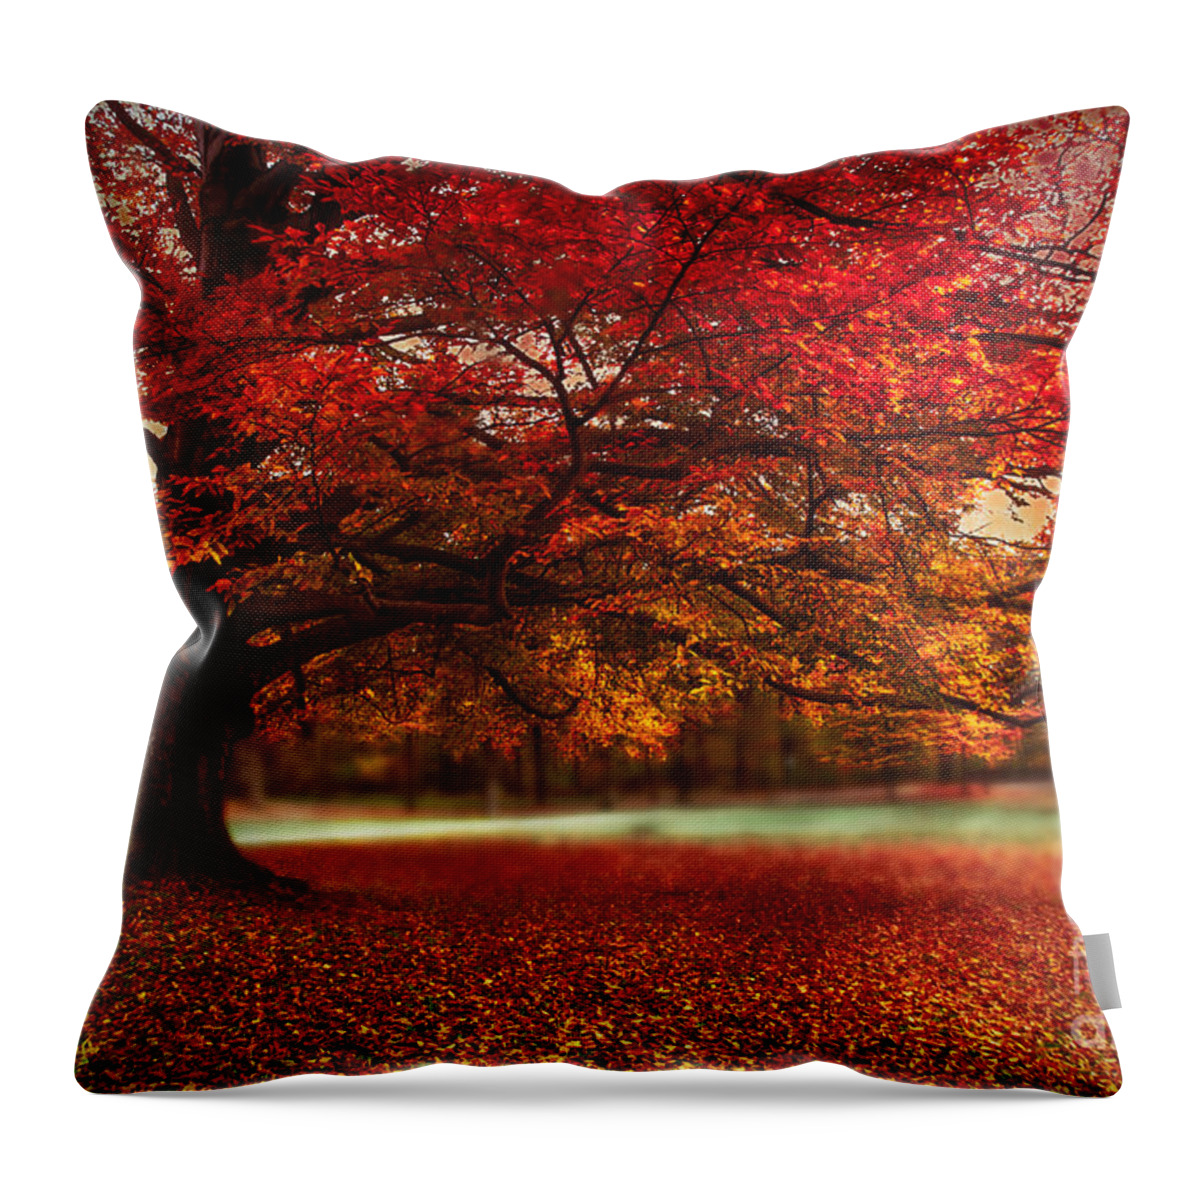 Autumn Throw Pillow featuring the photograph Finest Fall by Hannes Cmarits